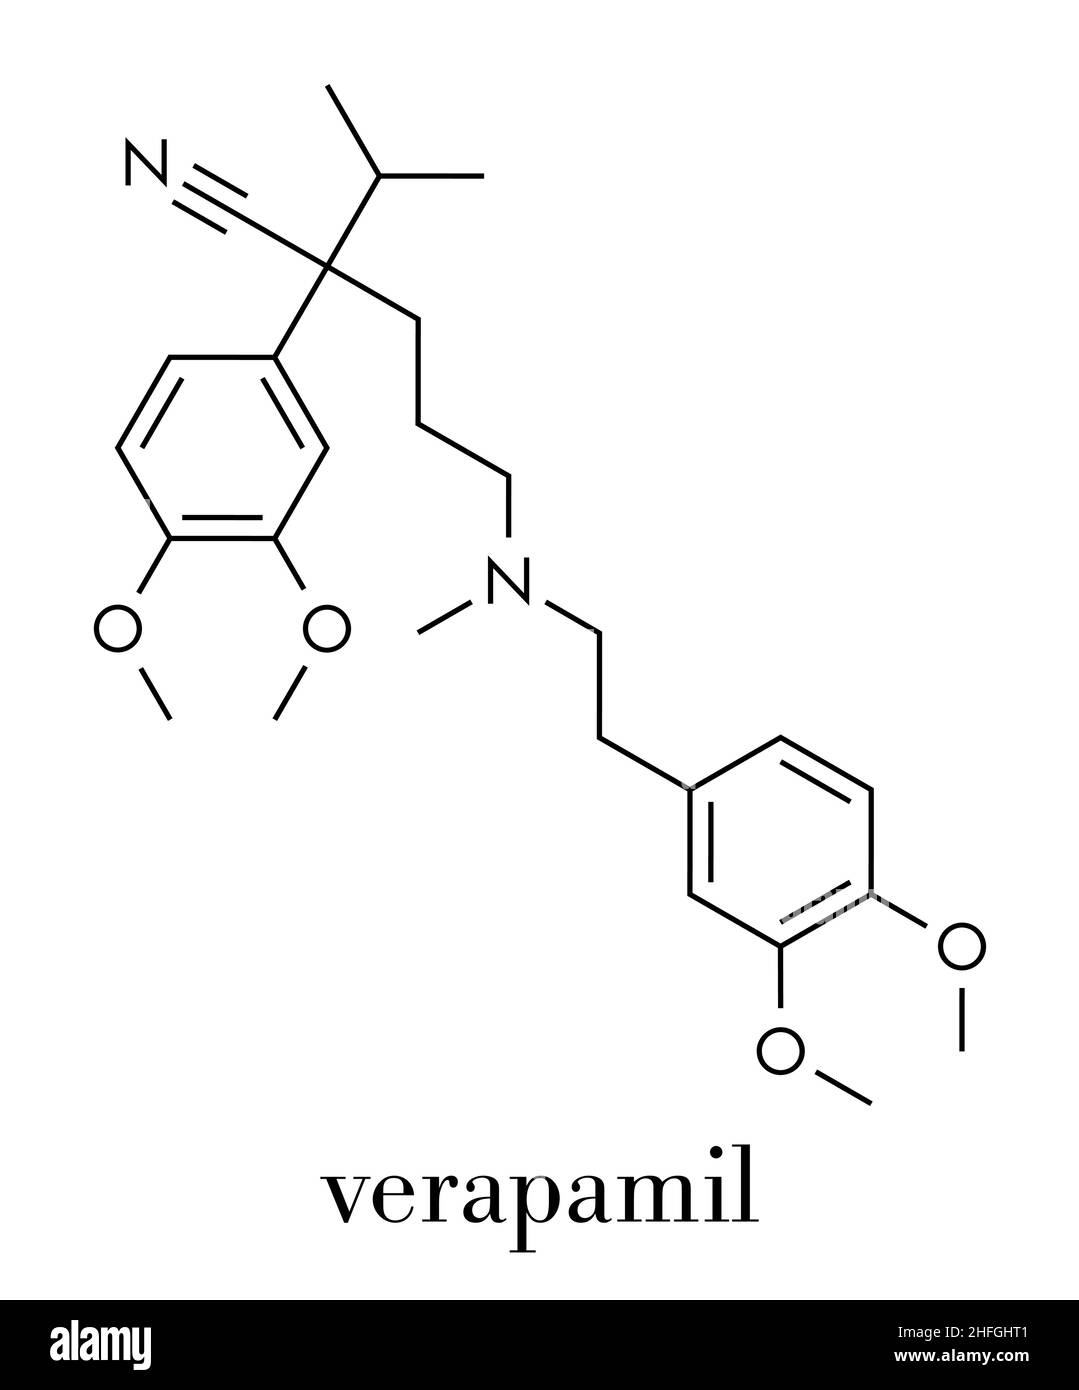 Verapamil calcium channel blocker drug. Mainly used in treatment of hypertension (high blood pressure) and cardiac arrhythmia (irregular heartbeat). S Stock Vector